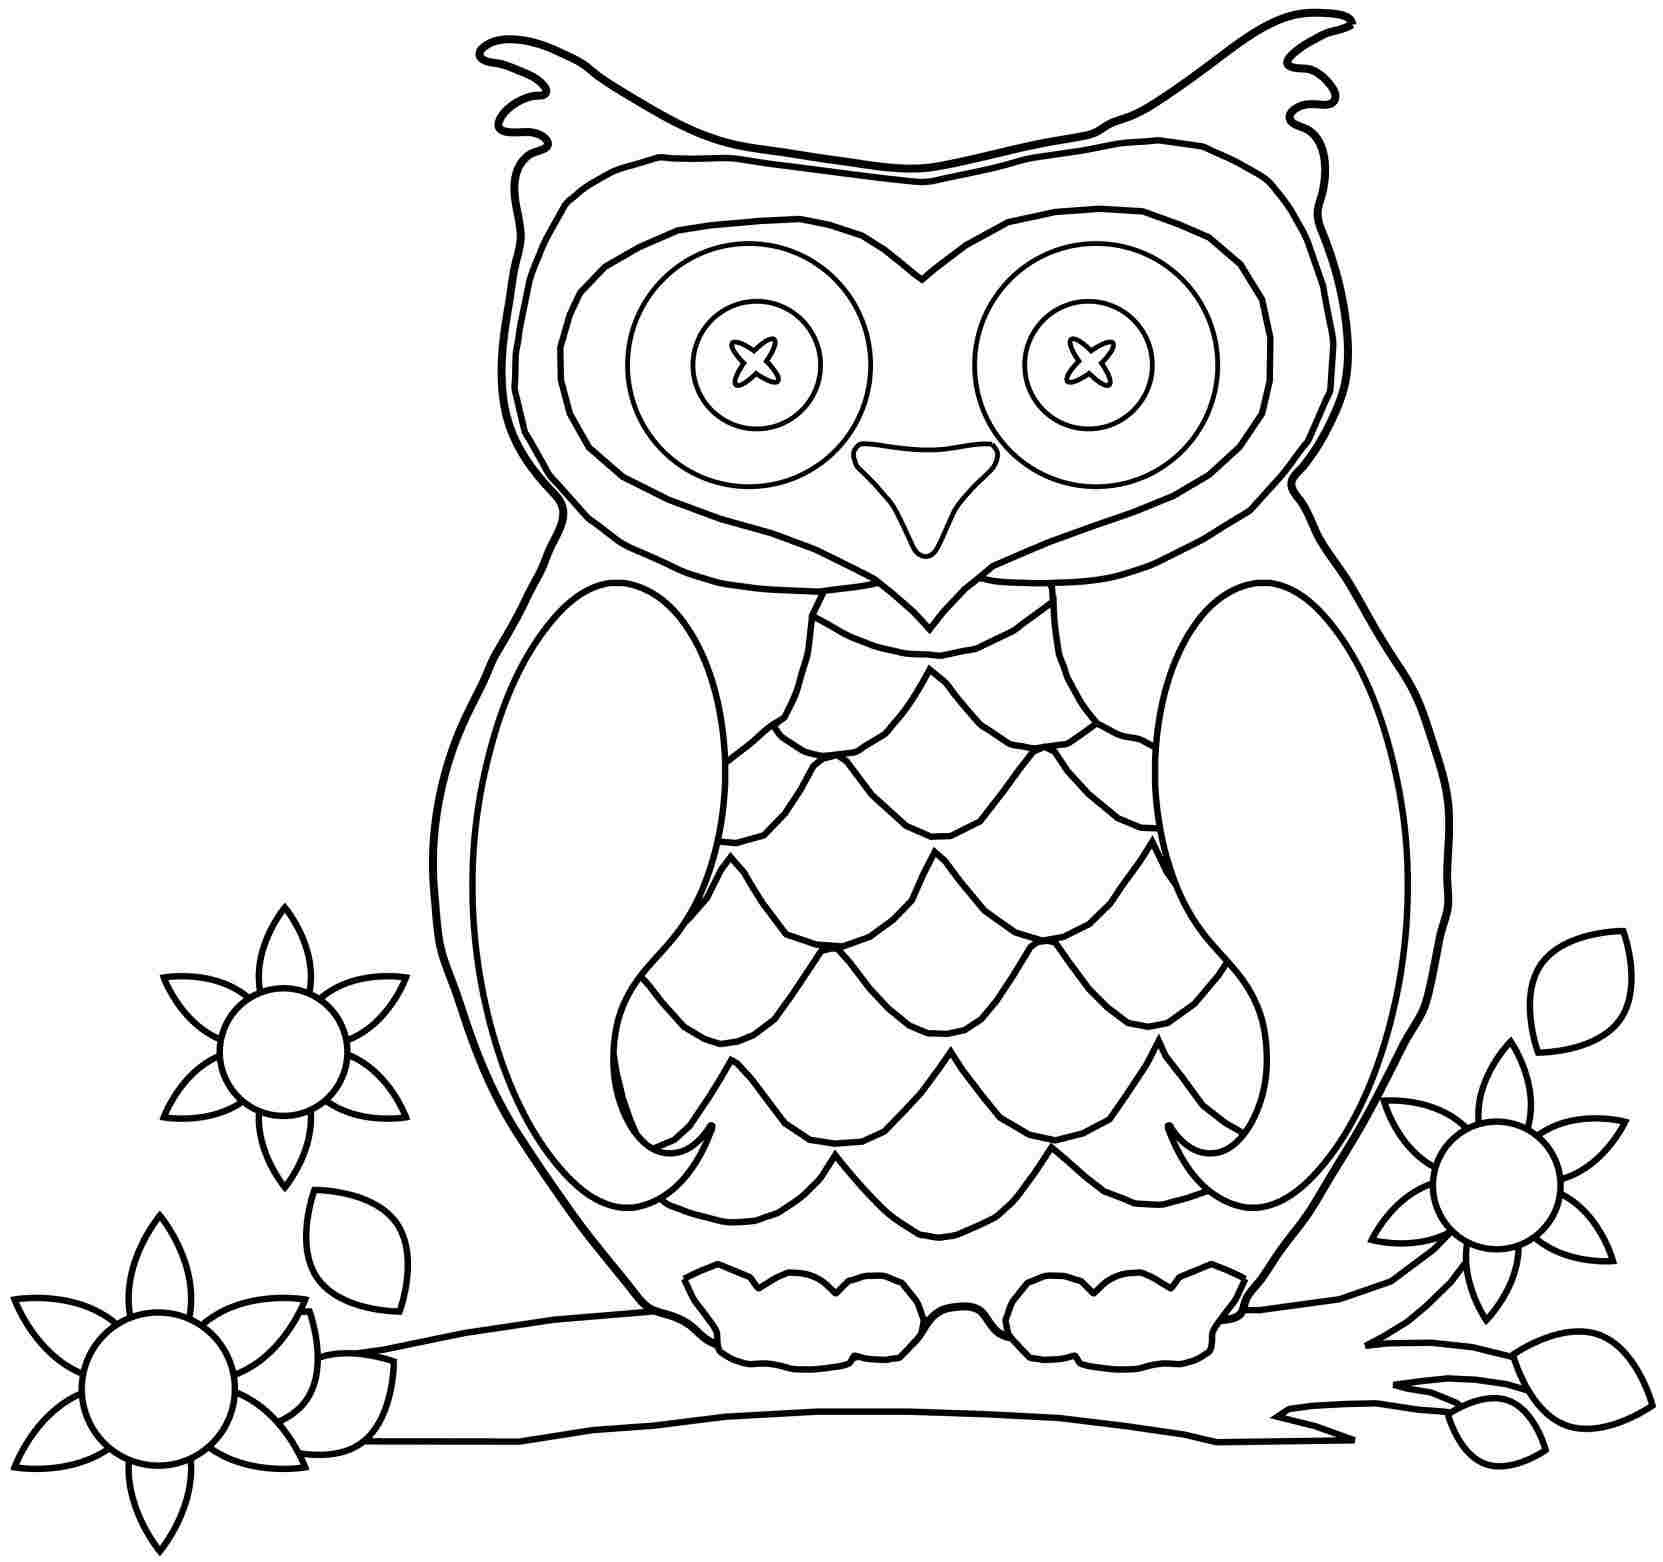 Printable Owl Coloring Pages
 owl coloring pages to print